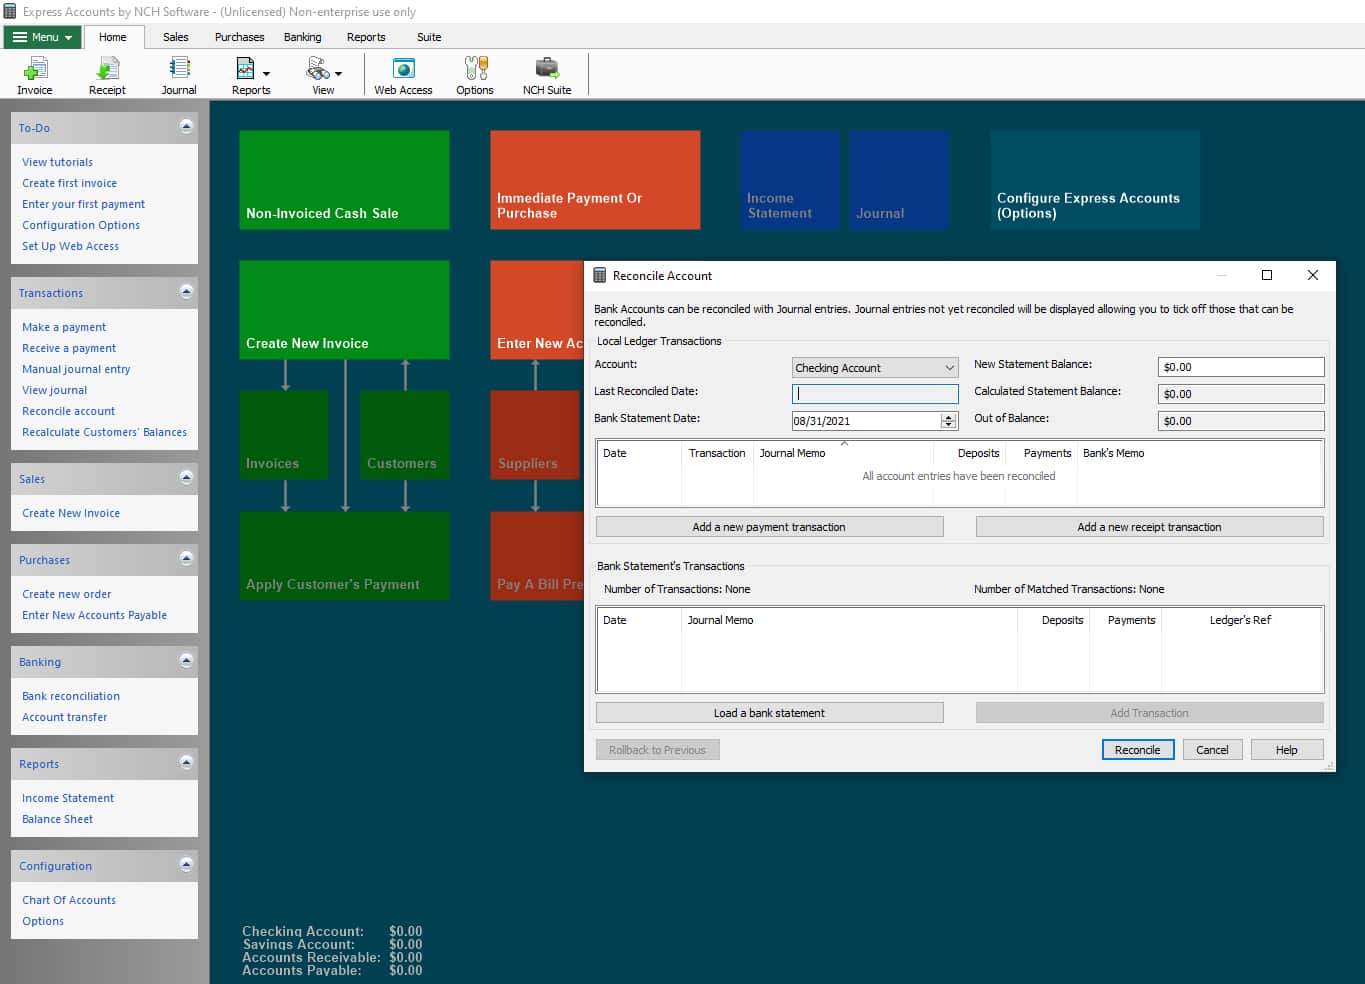 Screenshot of NCH Express Accounting Software Bank Reconciliation Example